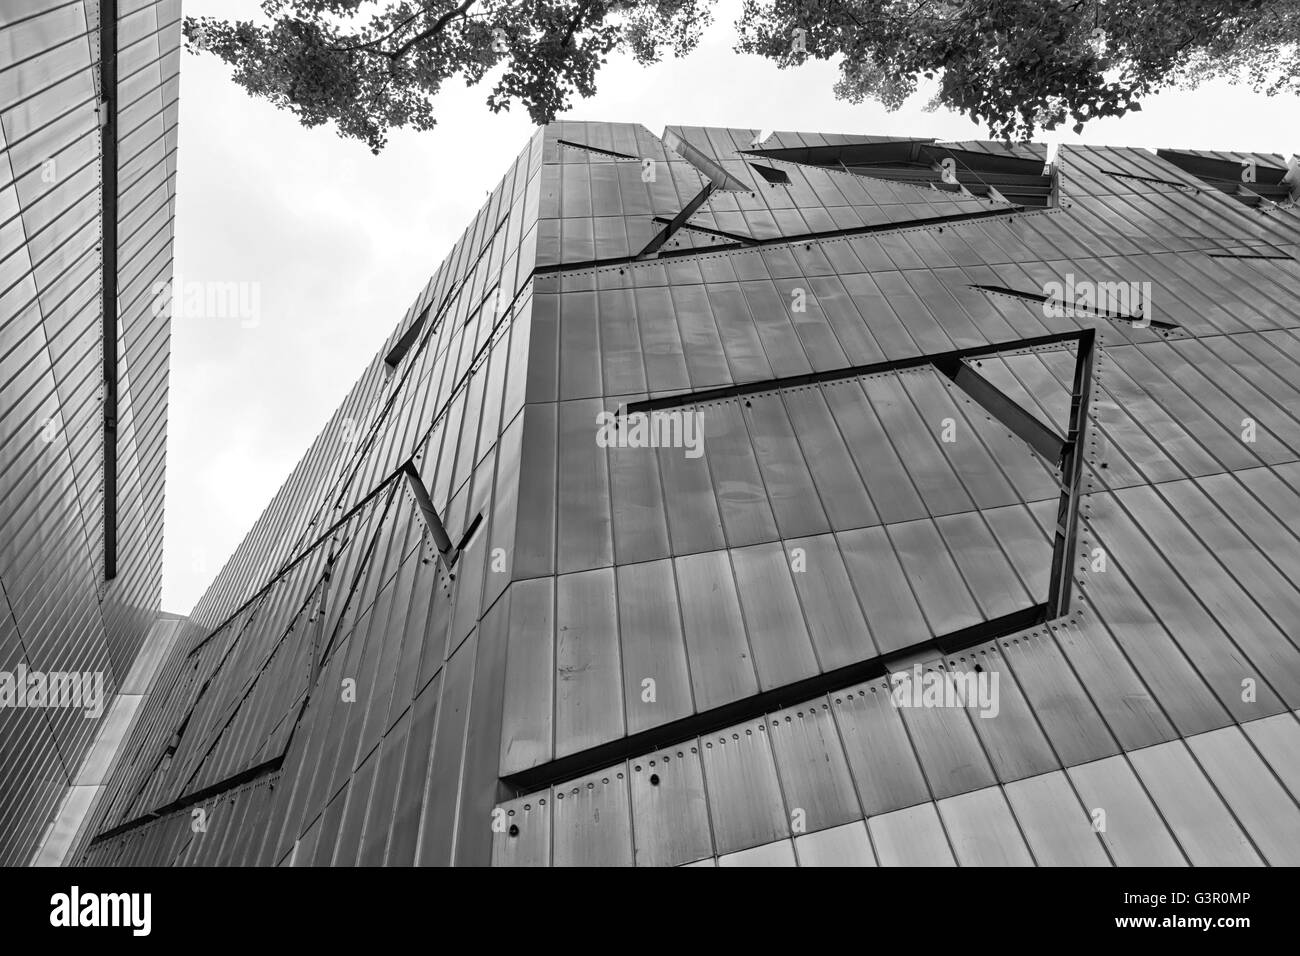 July 2015 - The Jewish Museum Berlin, Berlin, Germany: Facade detail. It is designed by architect Daniel Libeskind. Stock Photo